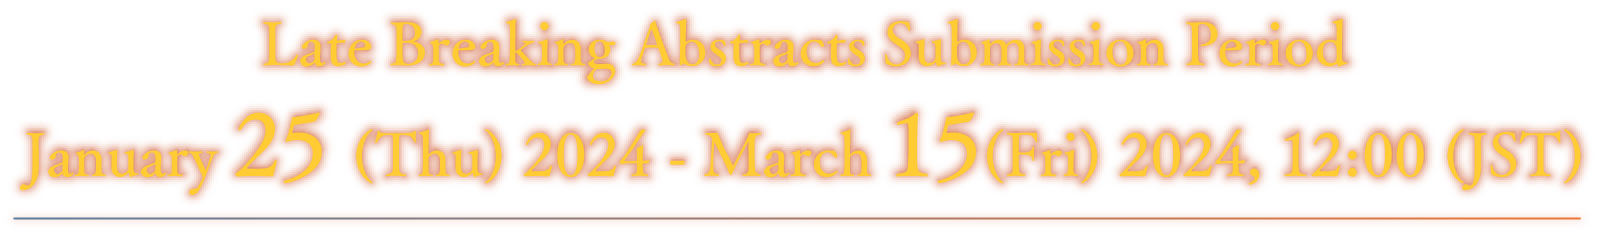 Late Breaking Abstracts Submission Period: January 25 (Tue) 2024 March 15 (Fri) 2024, 12:00 JST